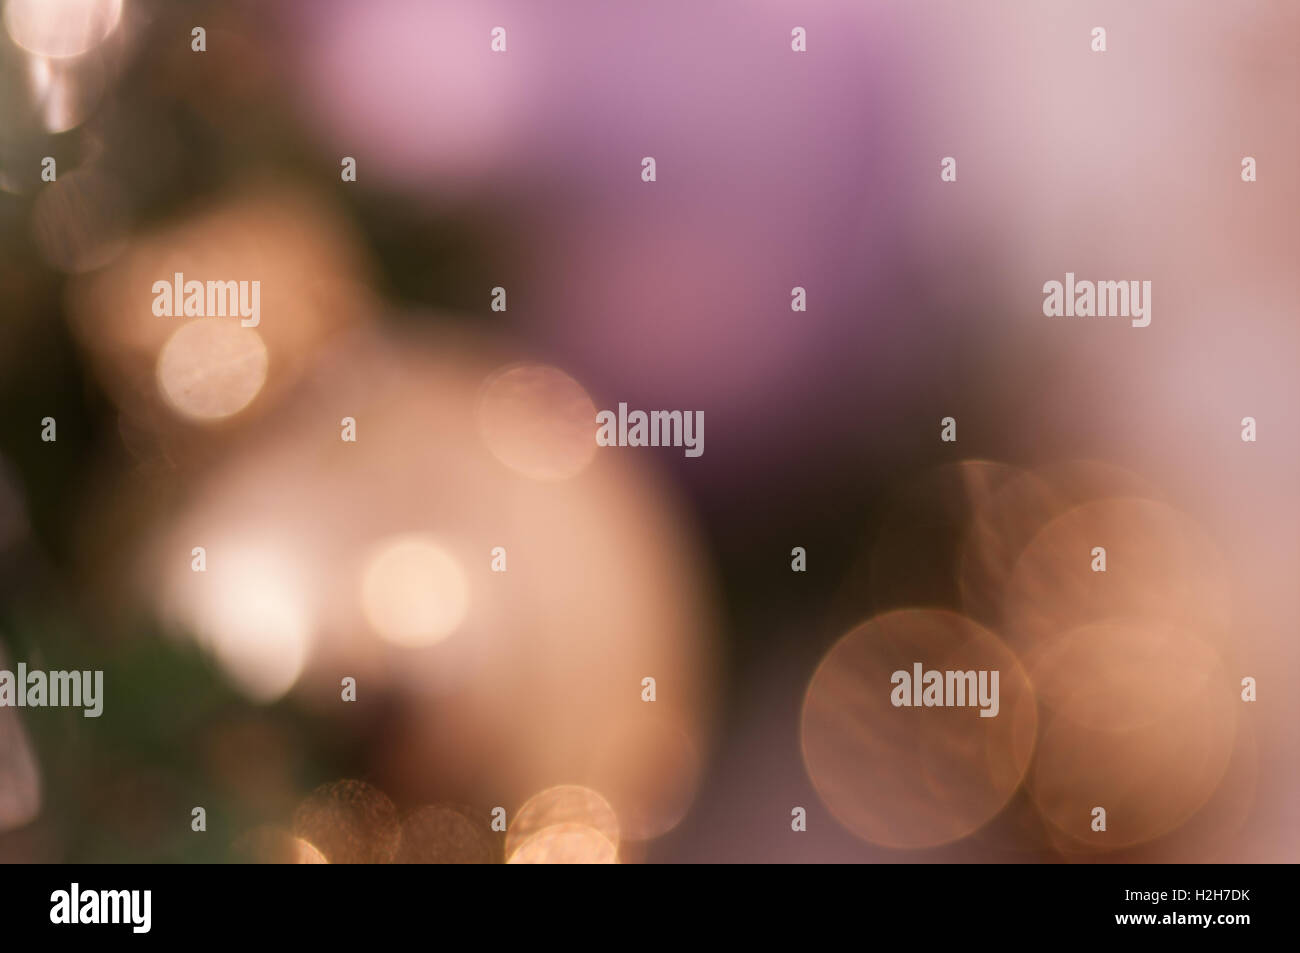 Christmas background of baubles and lights. Stock Photo